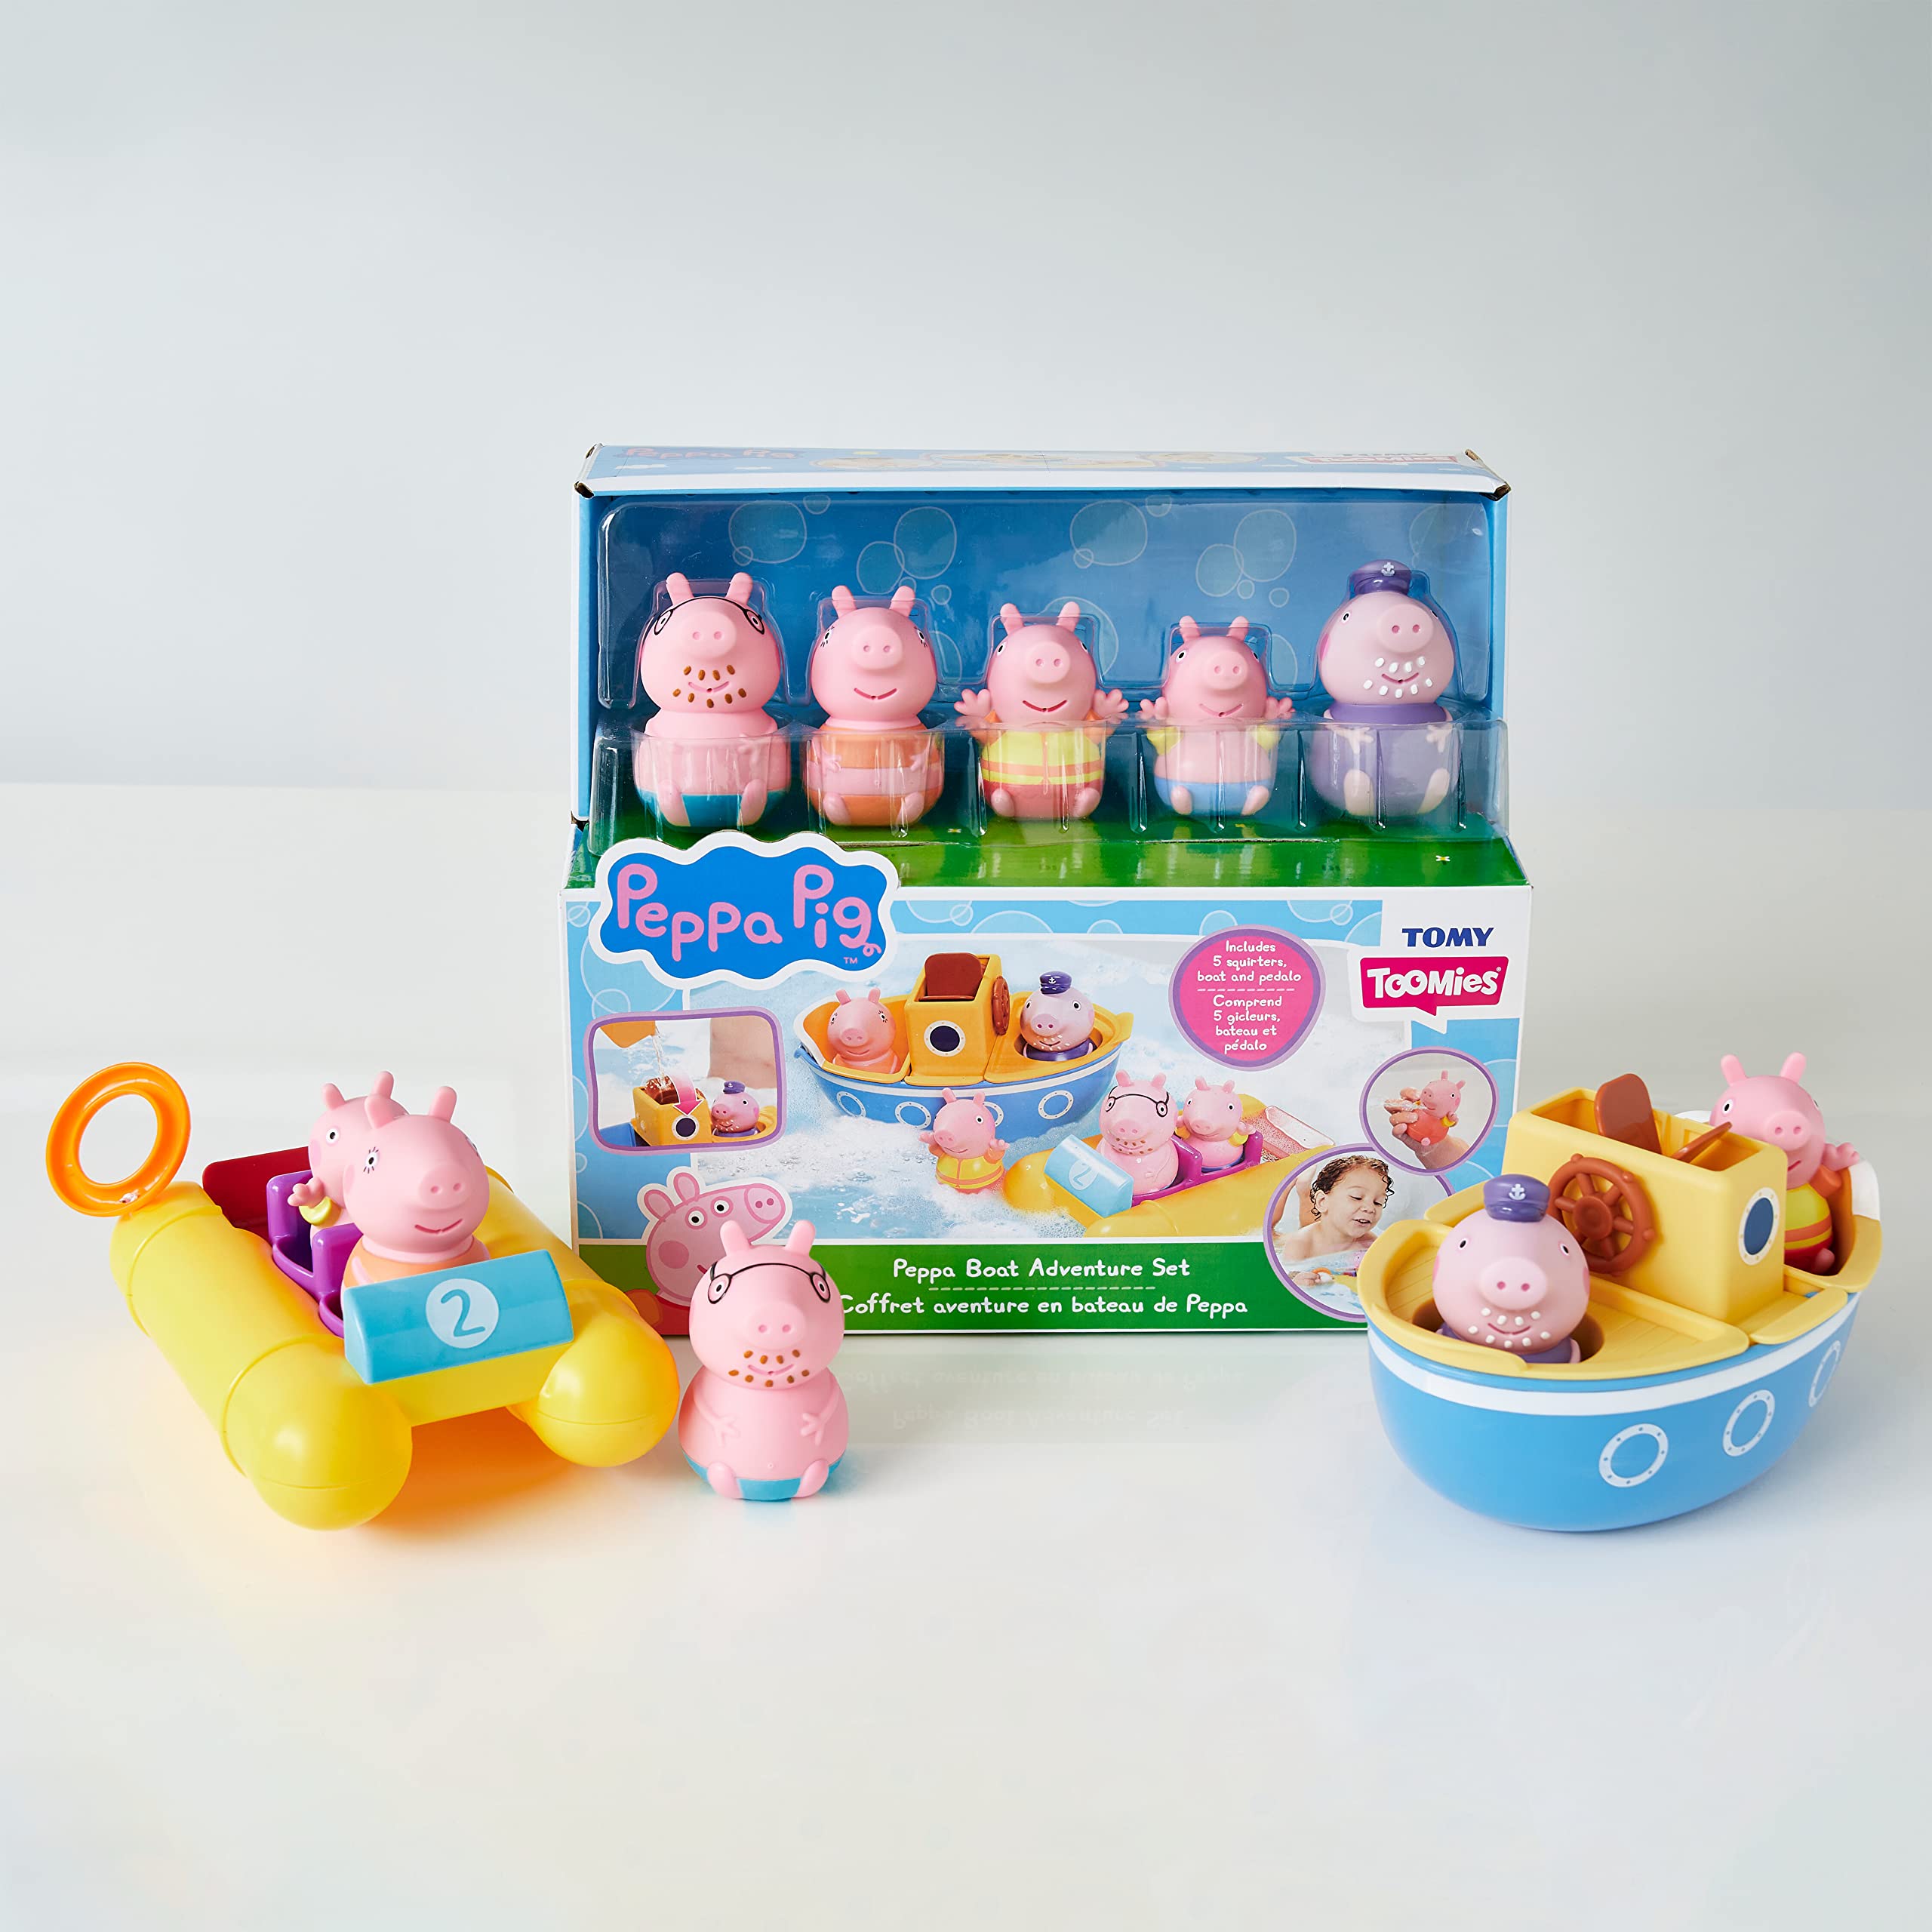 TOMY Toomies Peppa Pig Bath Toys — Peppa’s Boat Adventure Bath Toy Set — Includes Two Boats and 5 Peppa Pig Toy Figures — Baby and Toddler Bath Toys for 18 Months and Up